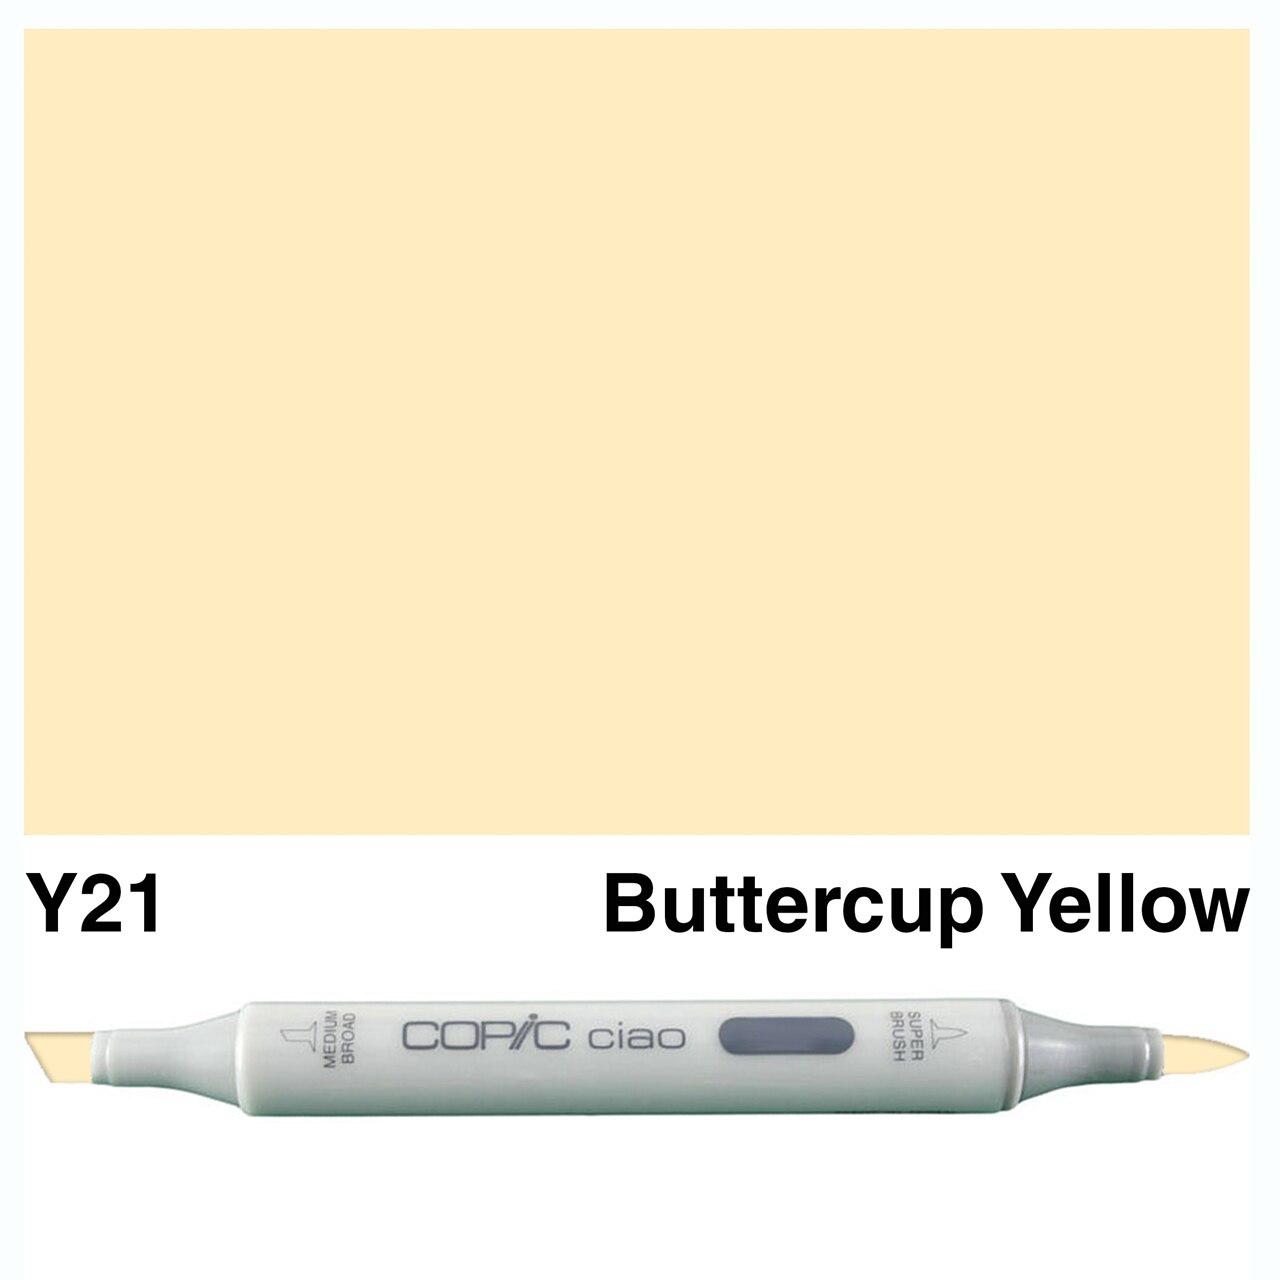 Copic - Ciao Marker - Buttercup Yellow - Y21-ScrapbookPal